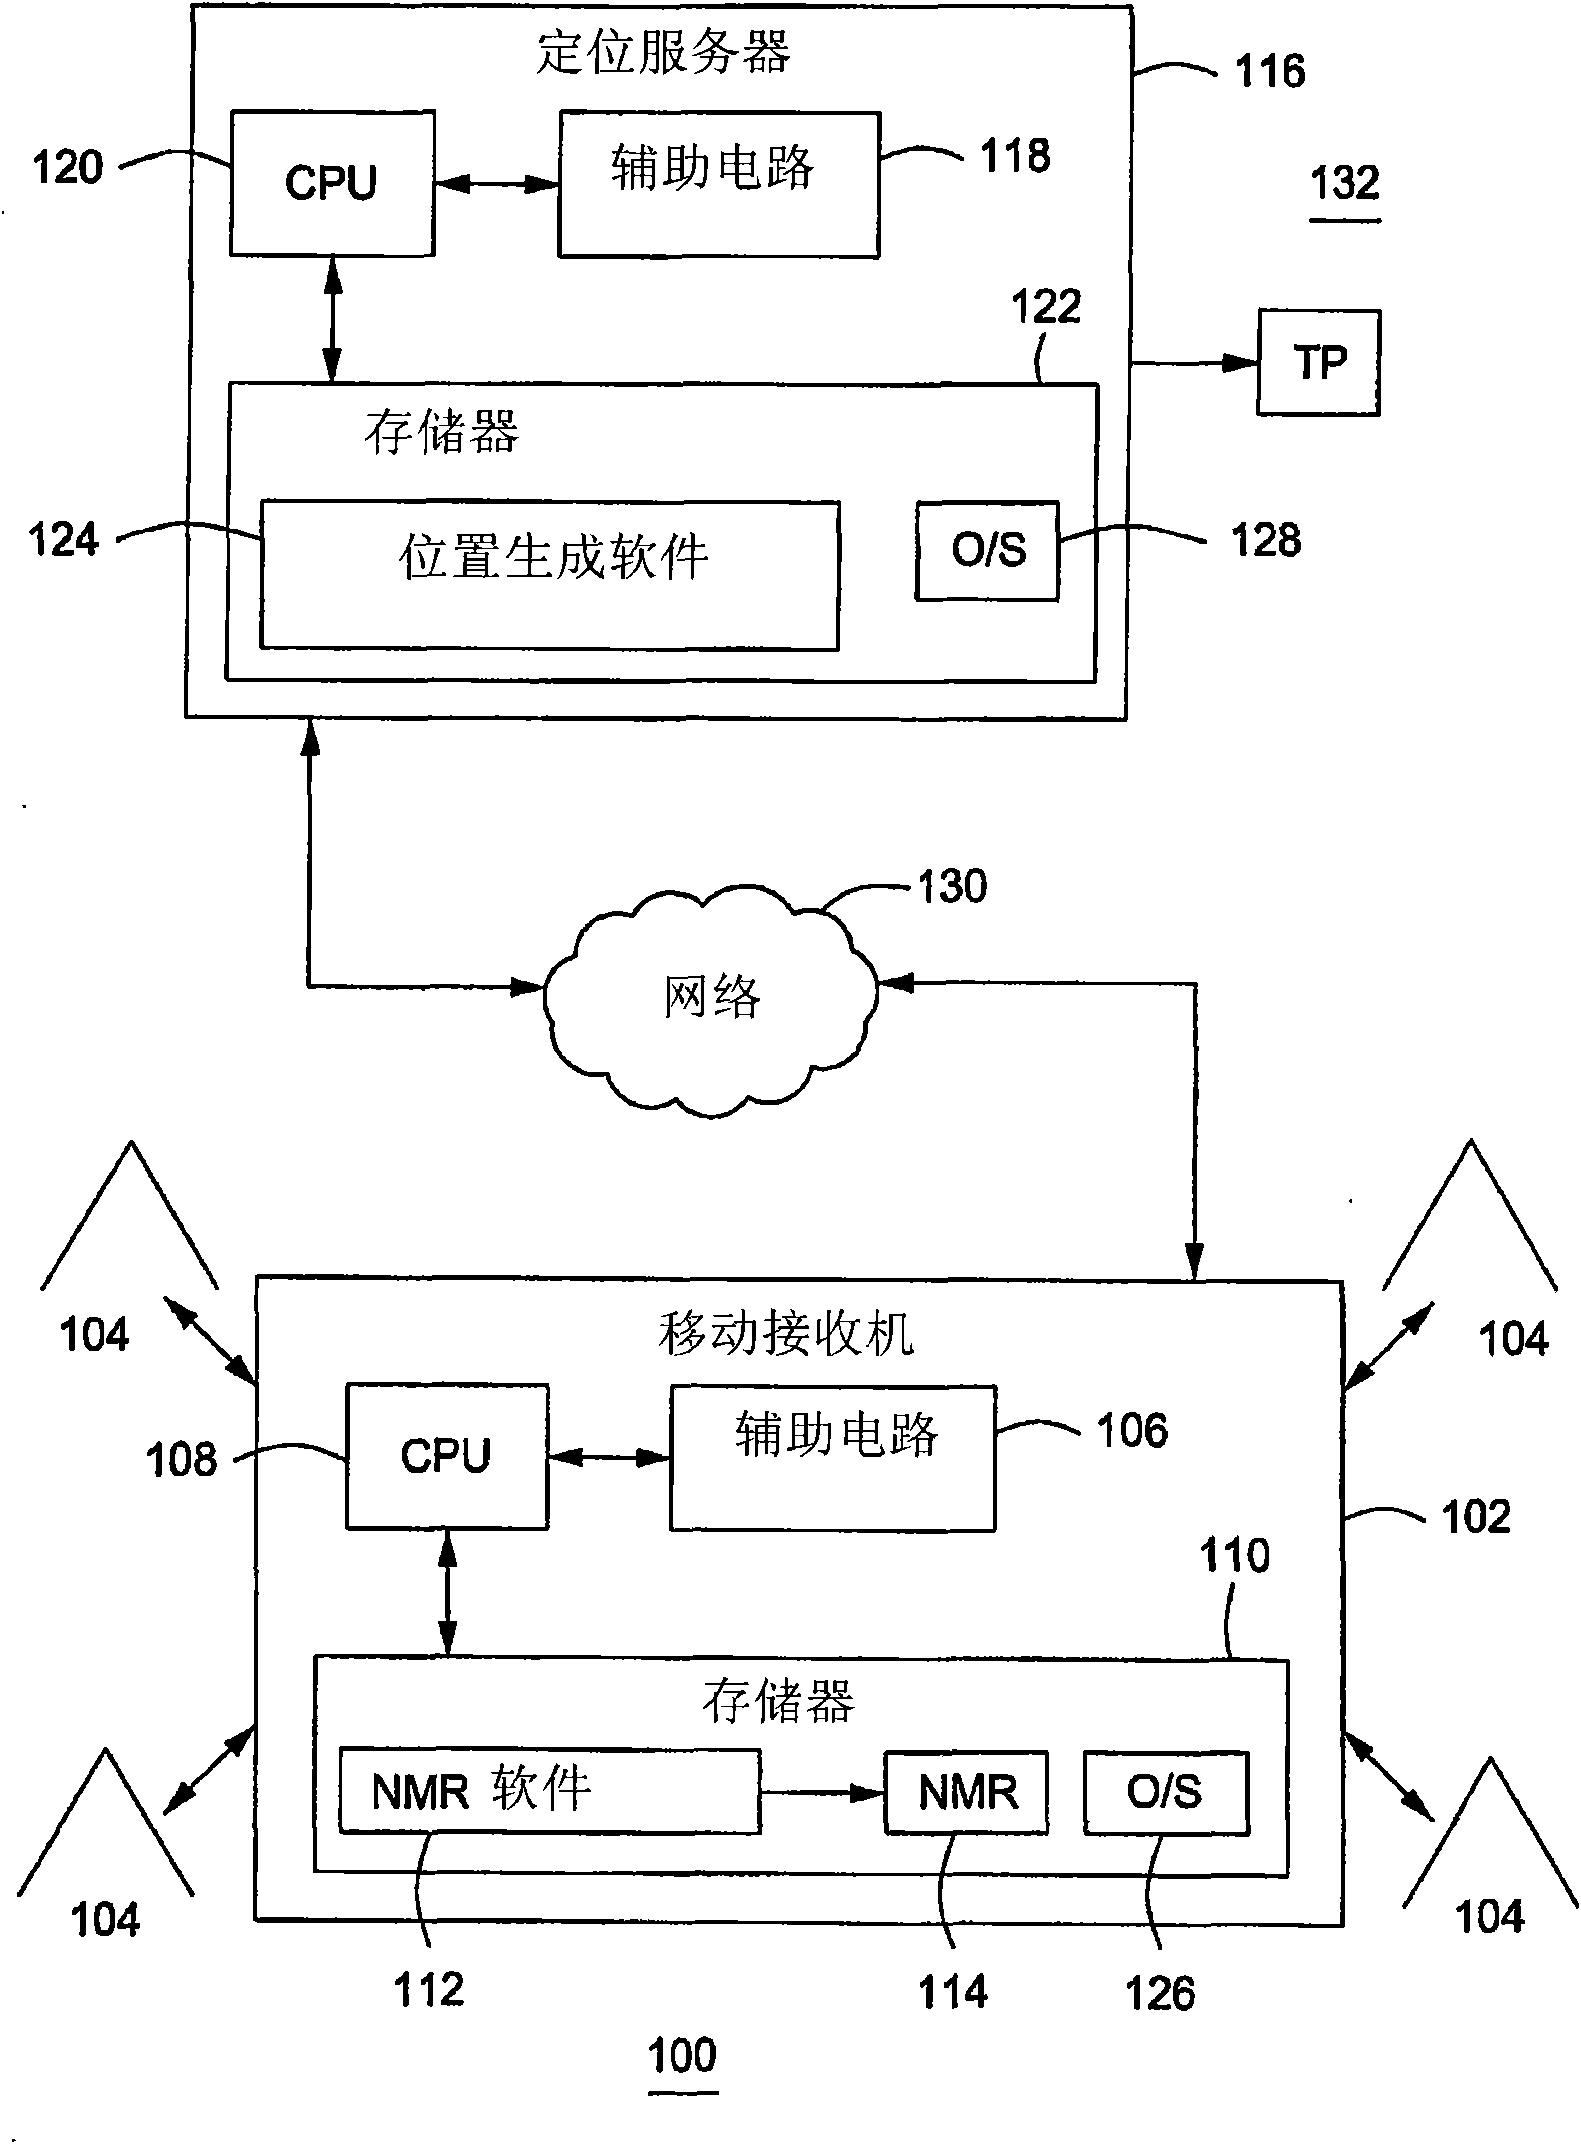 Method and system for locating position of a mobile receiver